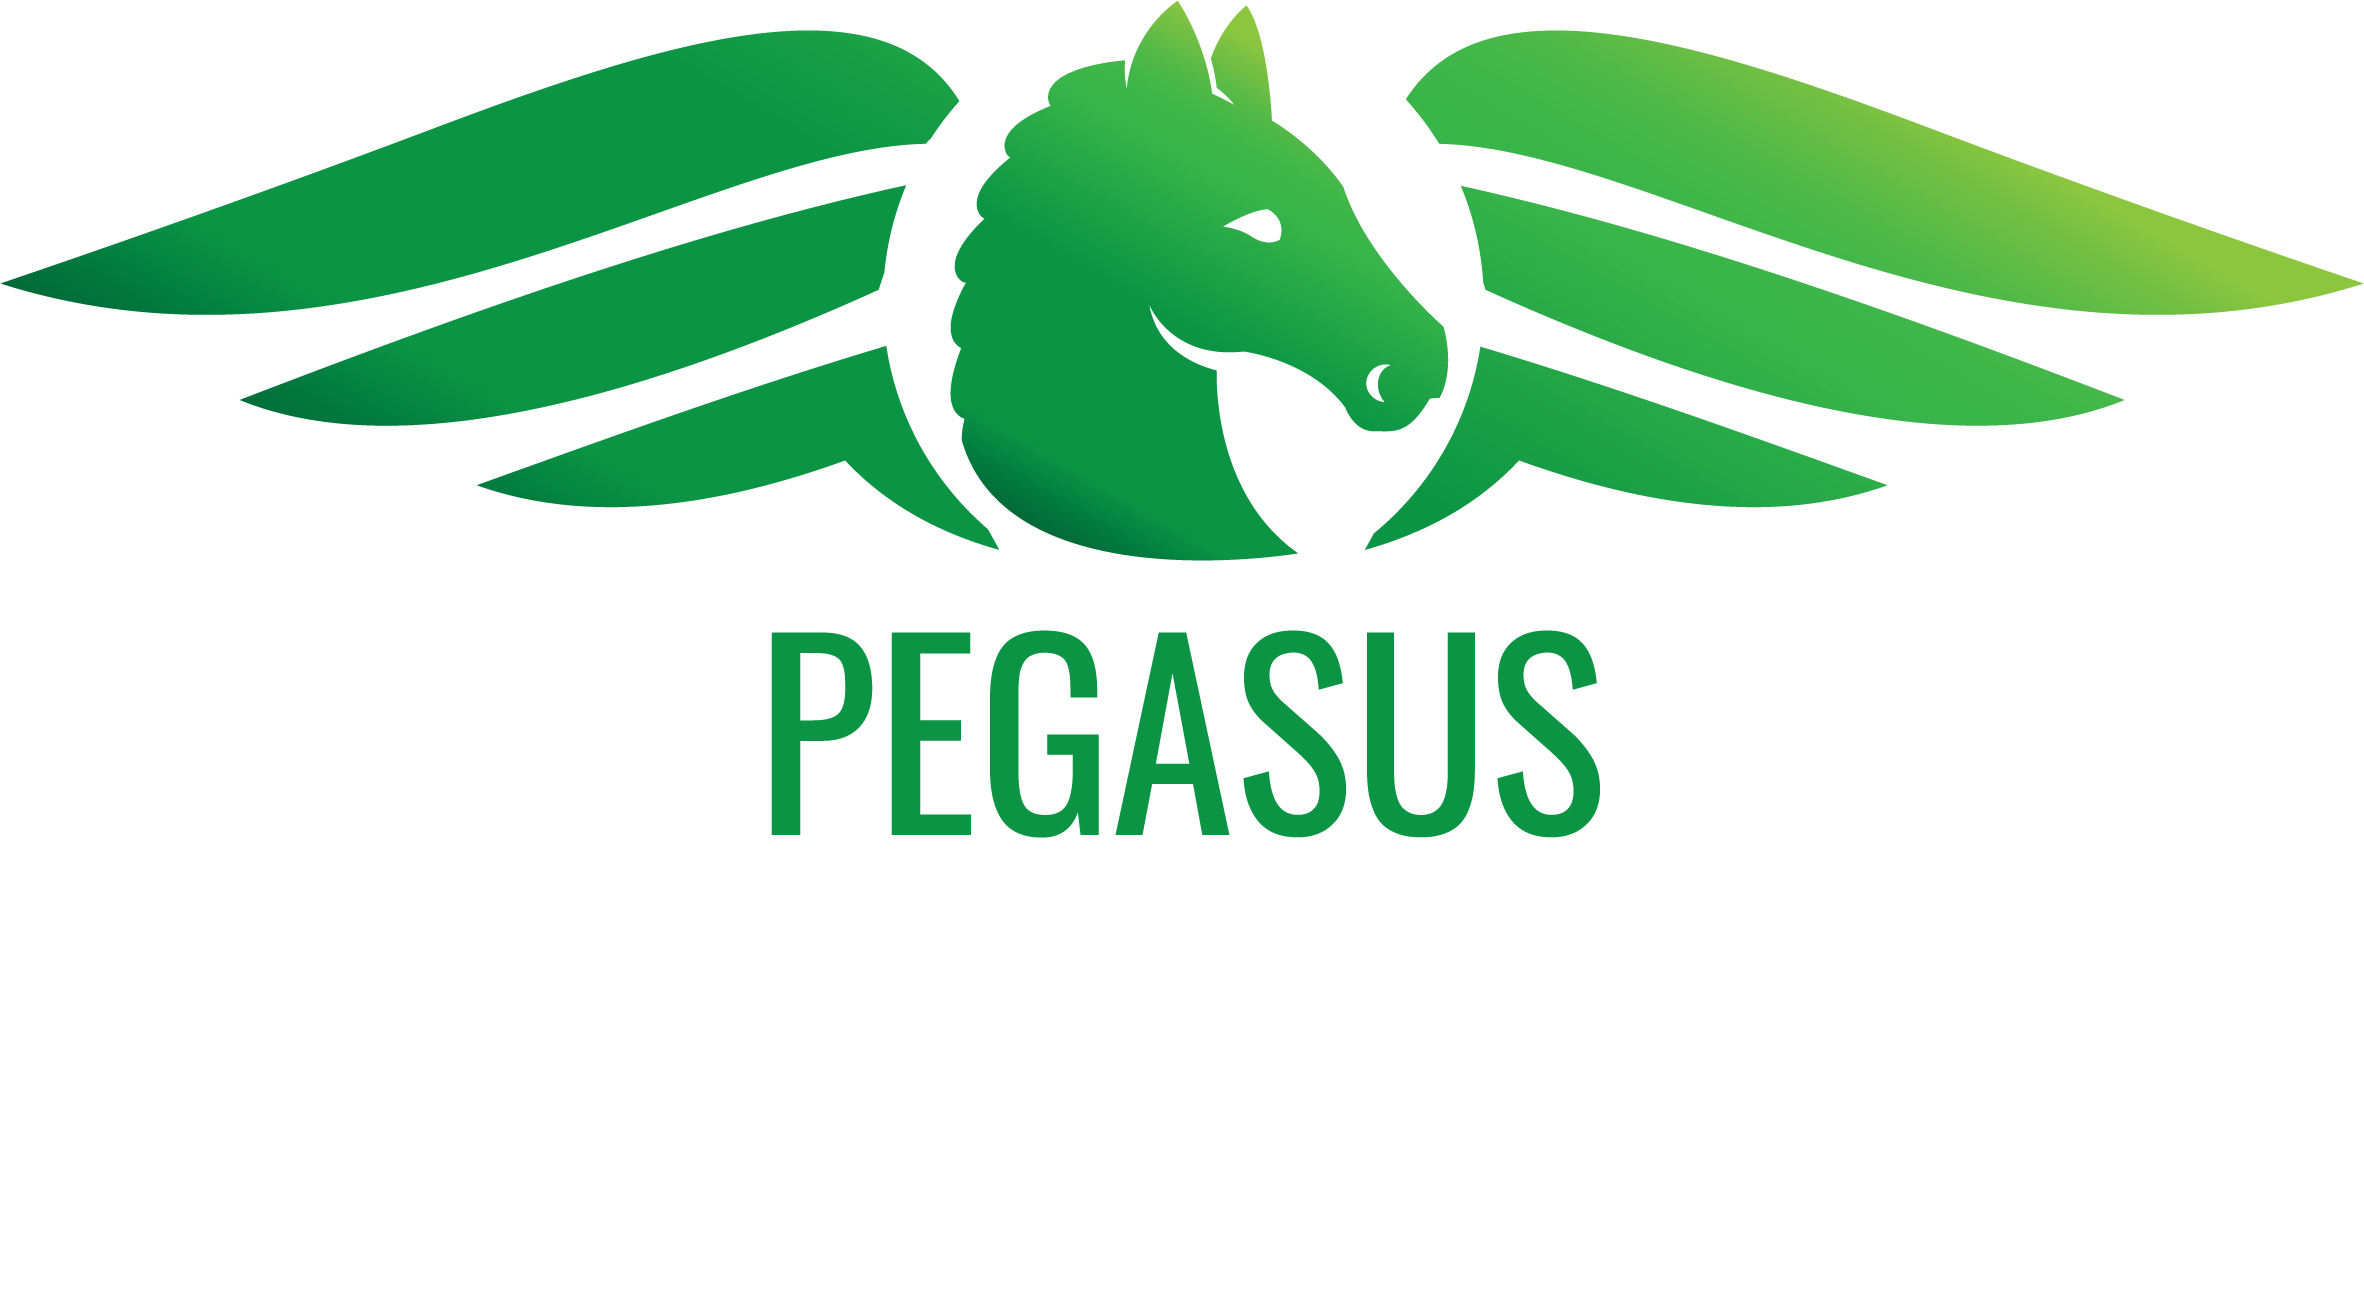 Pegasus Bus Company is a Dunkirk, Ohio-based company spearheaded by veterans in the school and transit bus industries.